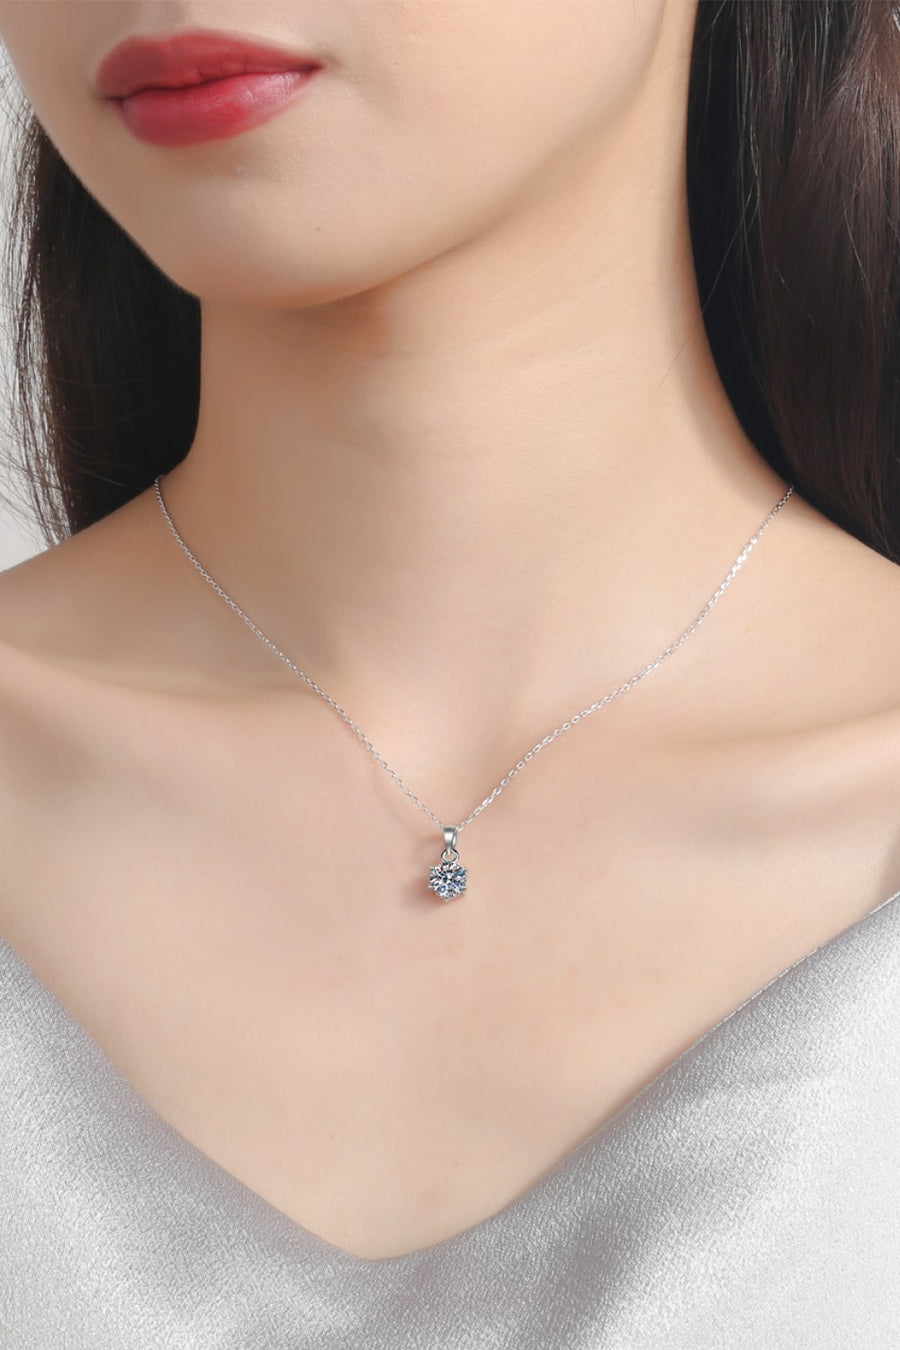 Best Diamond Necklace Jewelry Gifts for Women | 0.5 Carat Round Diamond Pendant Necklace - Get What You Need | MASON New York